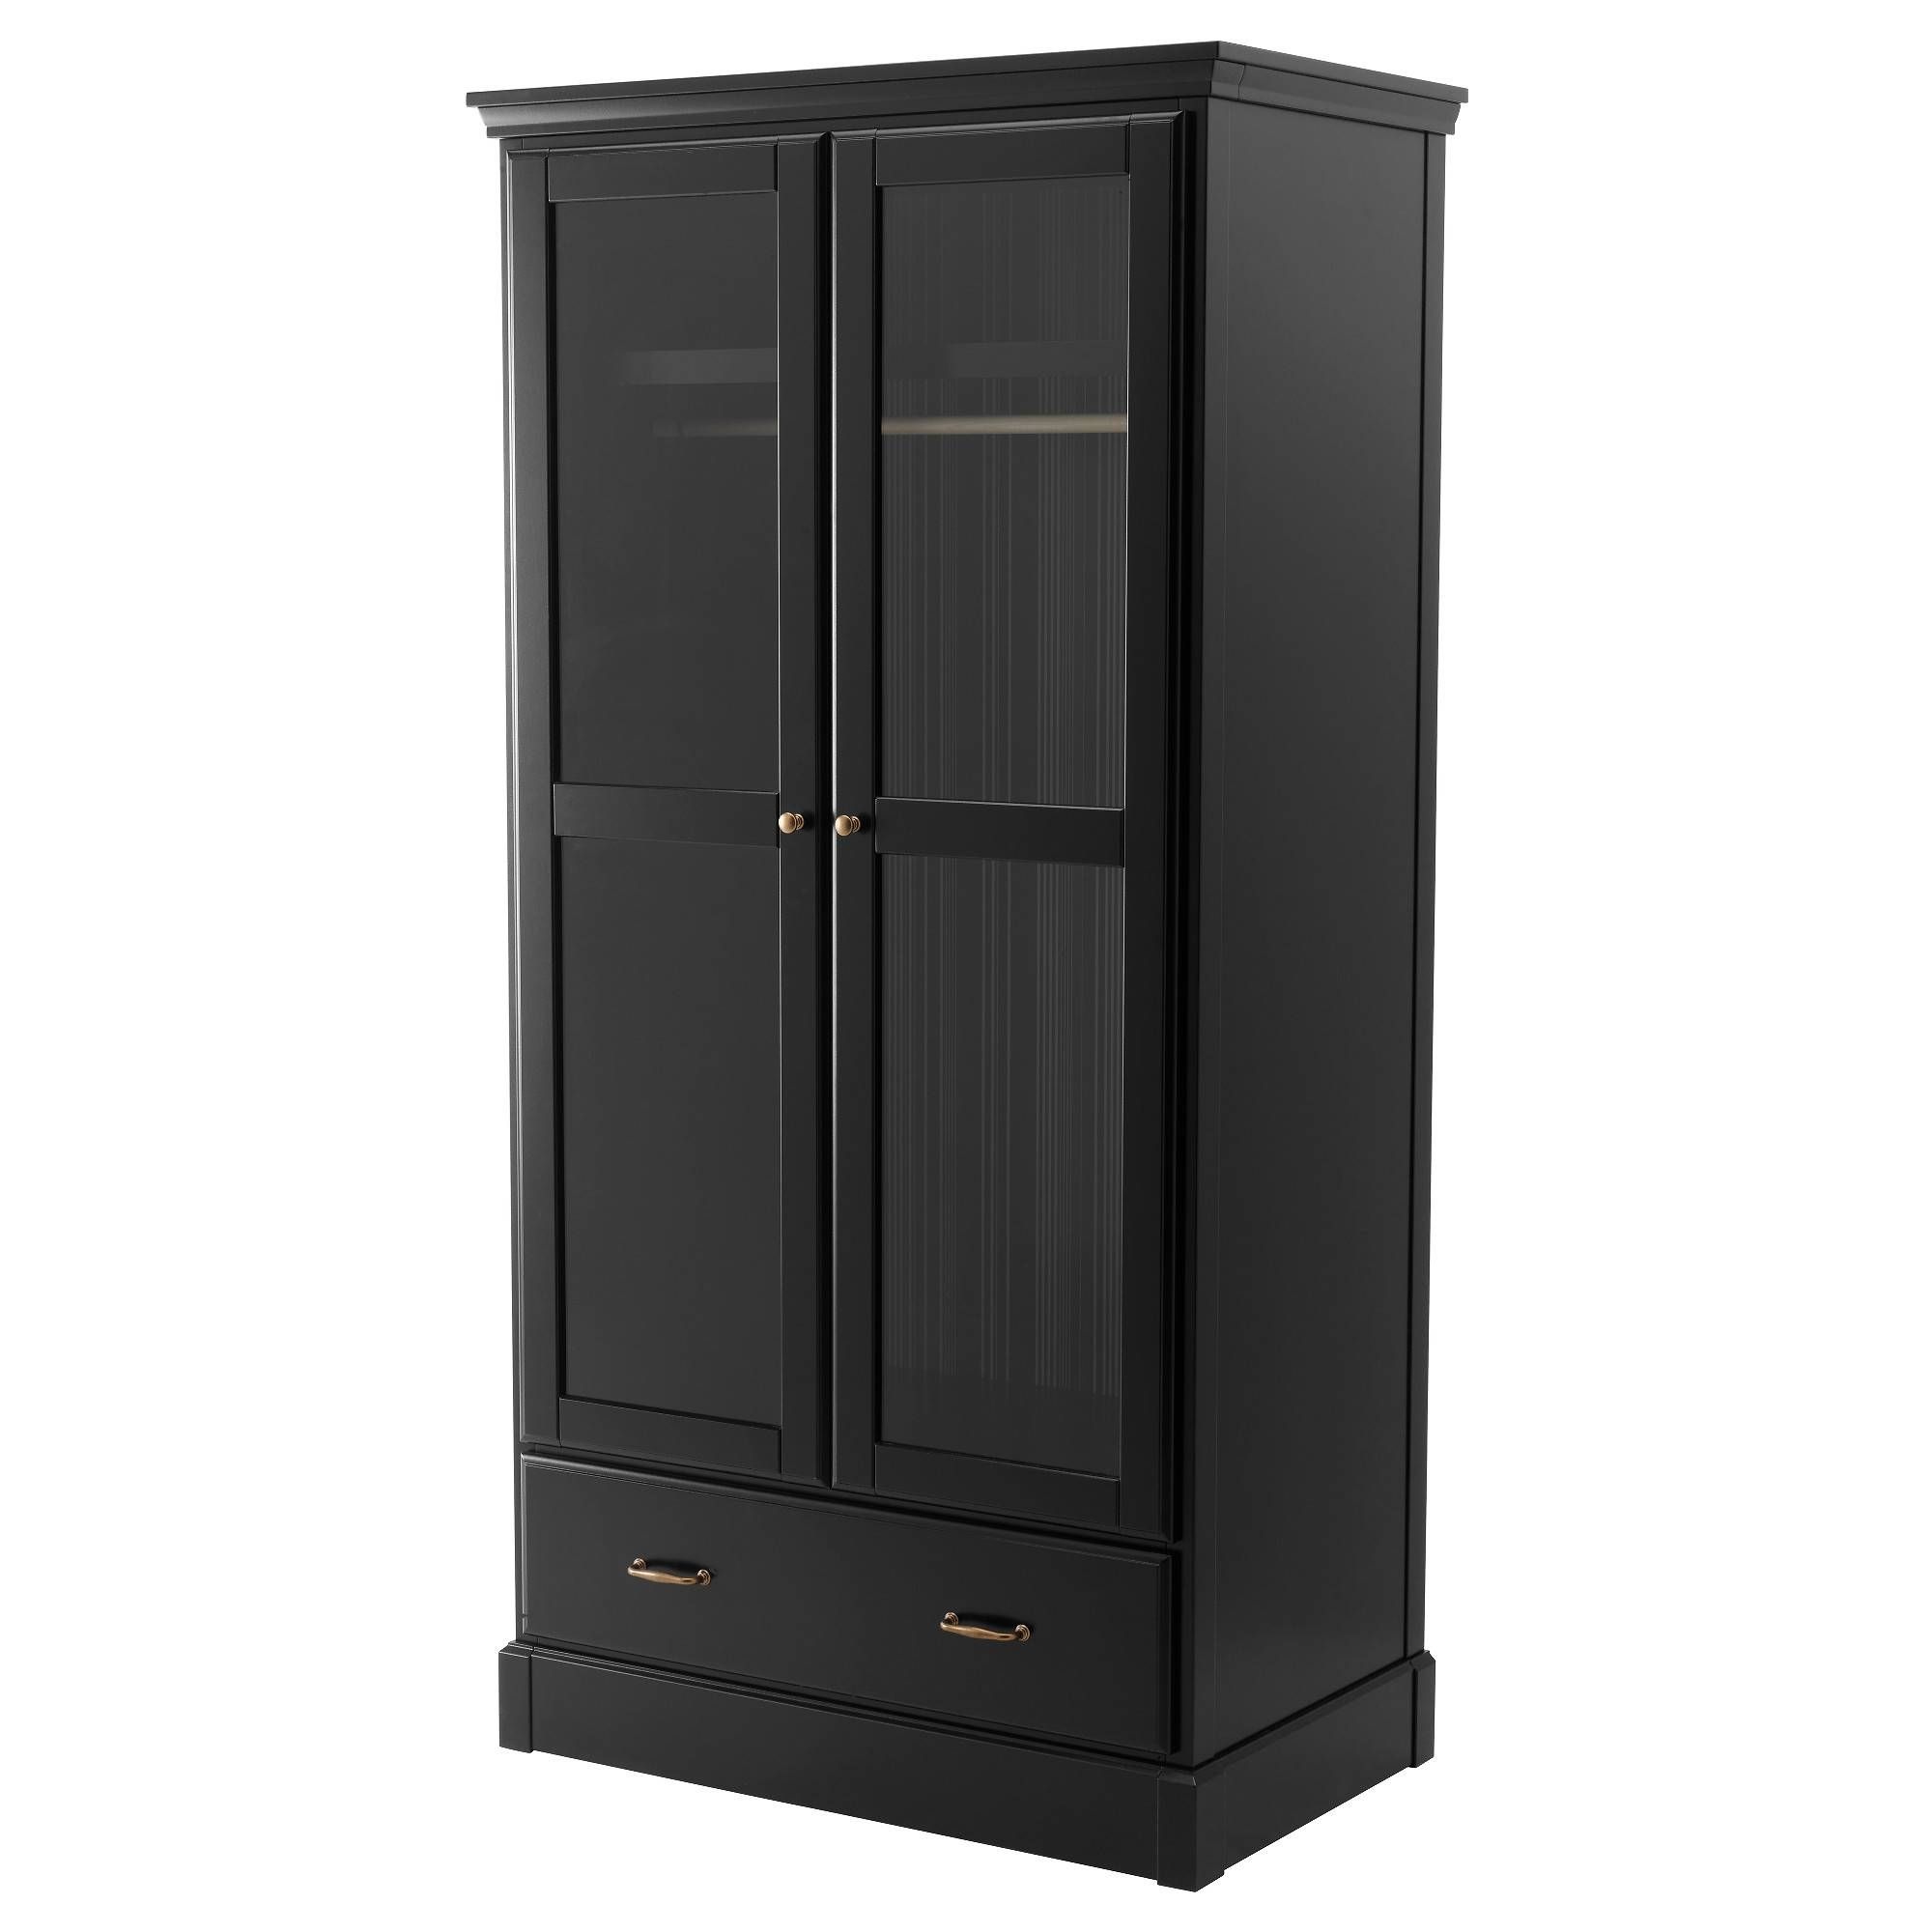 Wardrobes, Armoires & Closets – Ikea Throughout Black Wardrobes With Drawers (View 12 of 15)